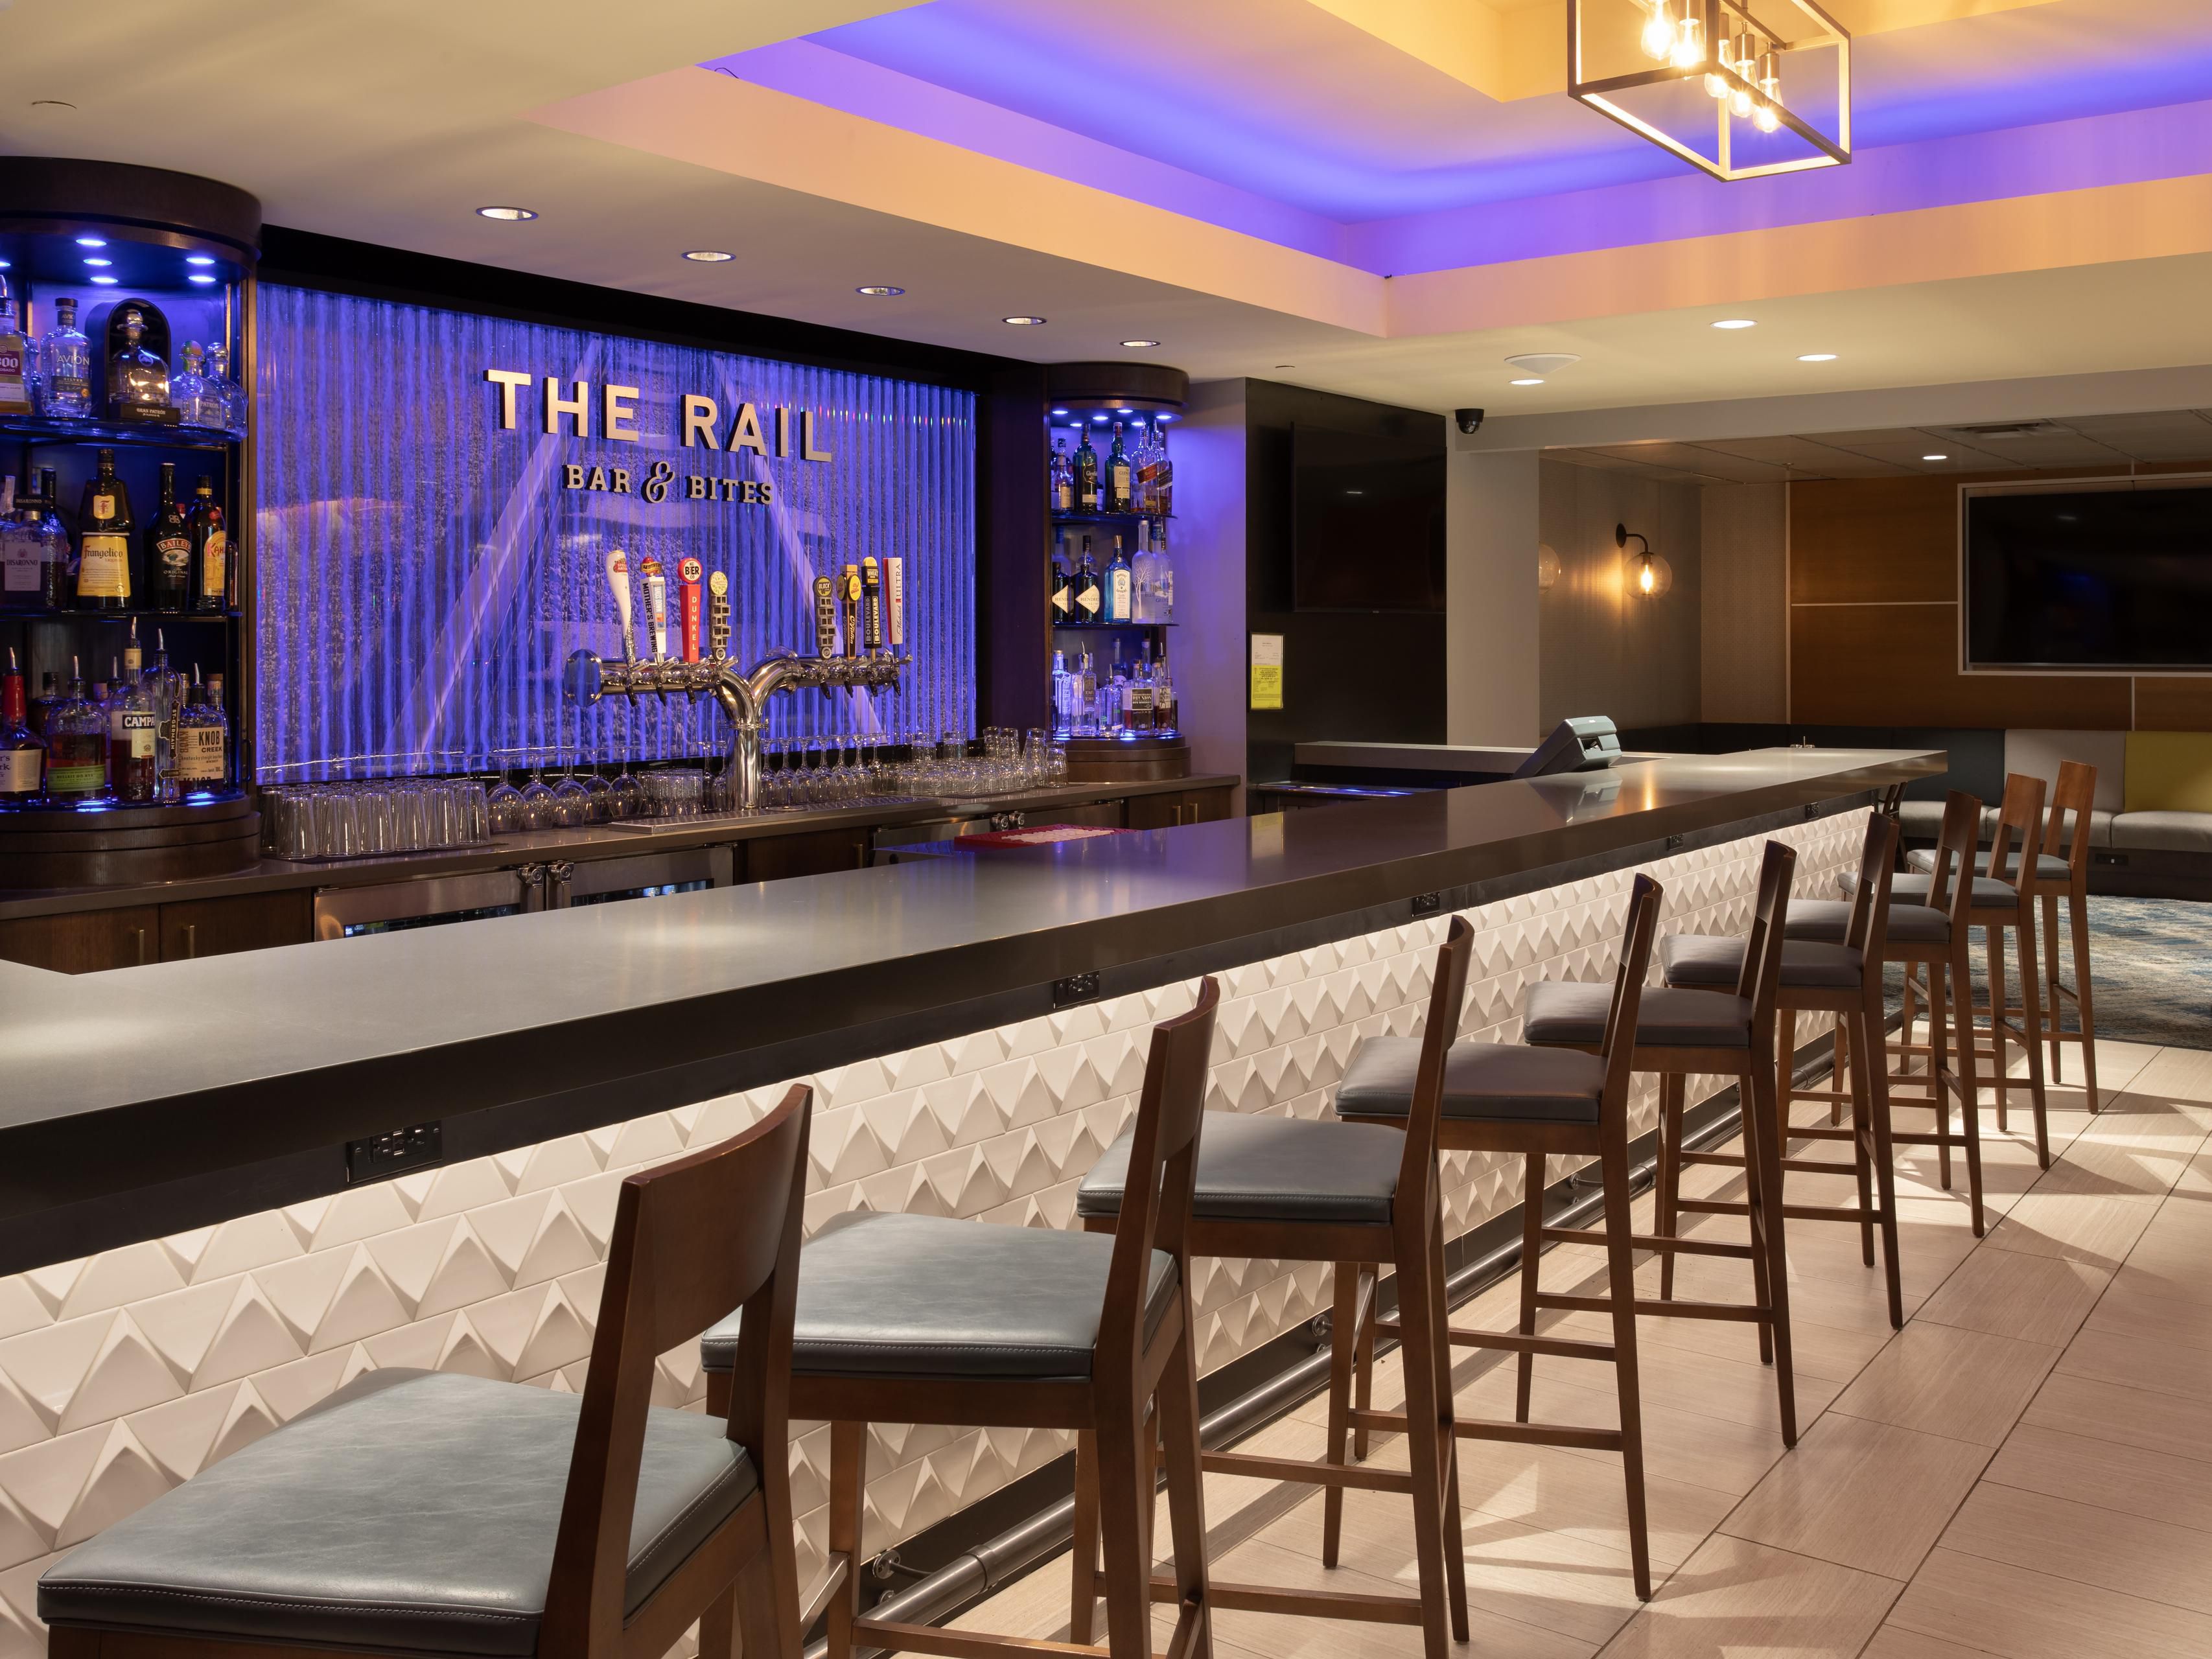 Located adjacent to the lobby, The Rail Bar & Bites is our newly redesigned bar and lounge serving up bold wines, creative cocktails, and local Kansas City brews. End your workday here with hand-crafted drinks and delicious appetizers as you catch up with colleagues or sip on craft beer with friends before venturing out into Kansas City. 
